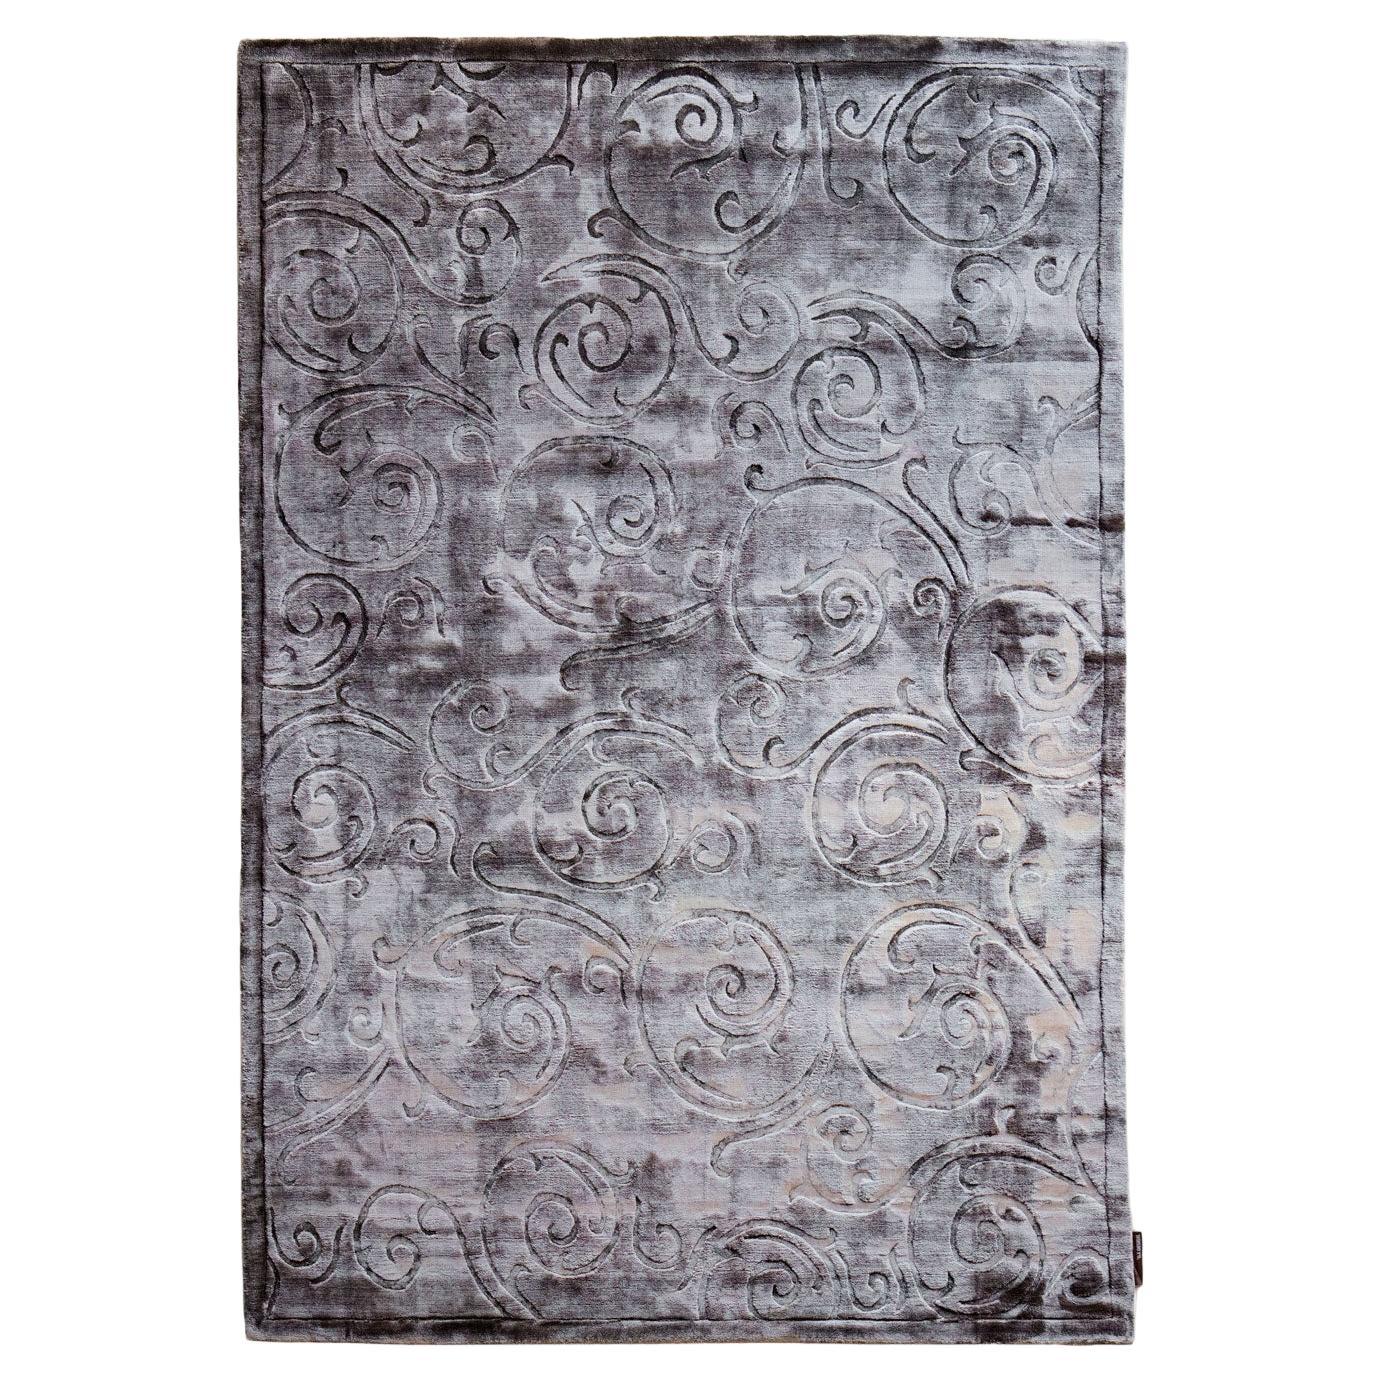 21 Cent Soft Grey Floral Drawings Rug by Deanna Comellini In Stock 170x240 cm For Sale